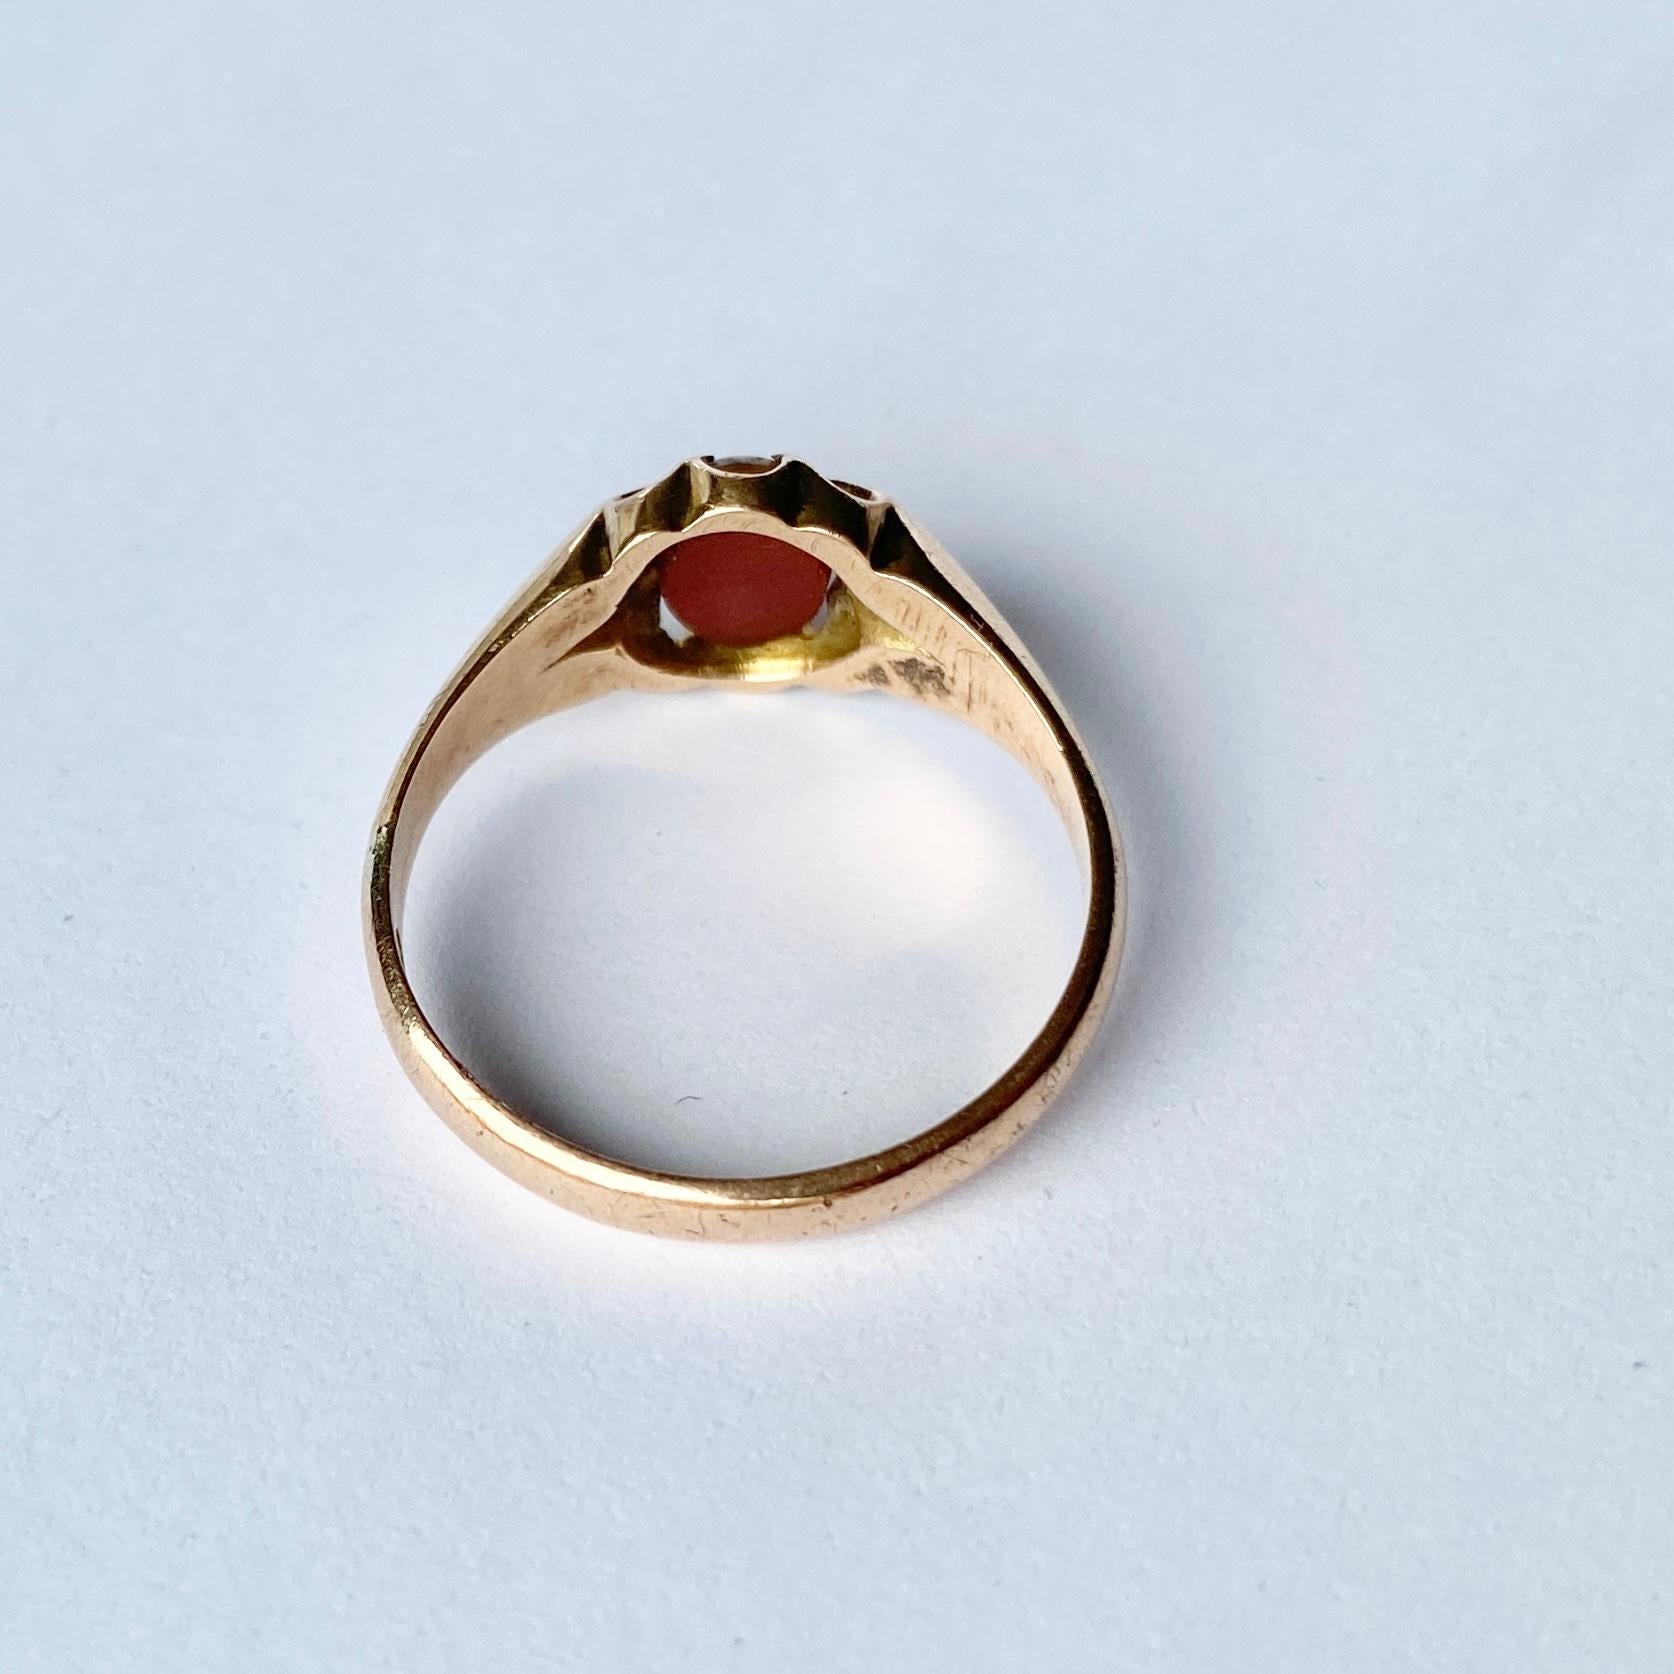 Sat upon simple ridged shoulders is a gorgeous sardonyx stone with a deep burnt orange underside and a pale white coating to the top. Fully hallmarked Chester 1915.

Ring Size: P or 7 3/4 
Stone Dimensions: 6x5mm 

Weight: 2.9g